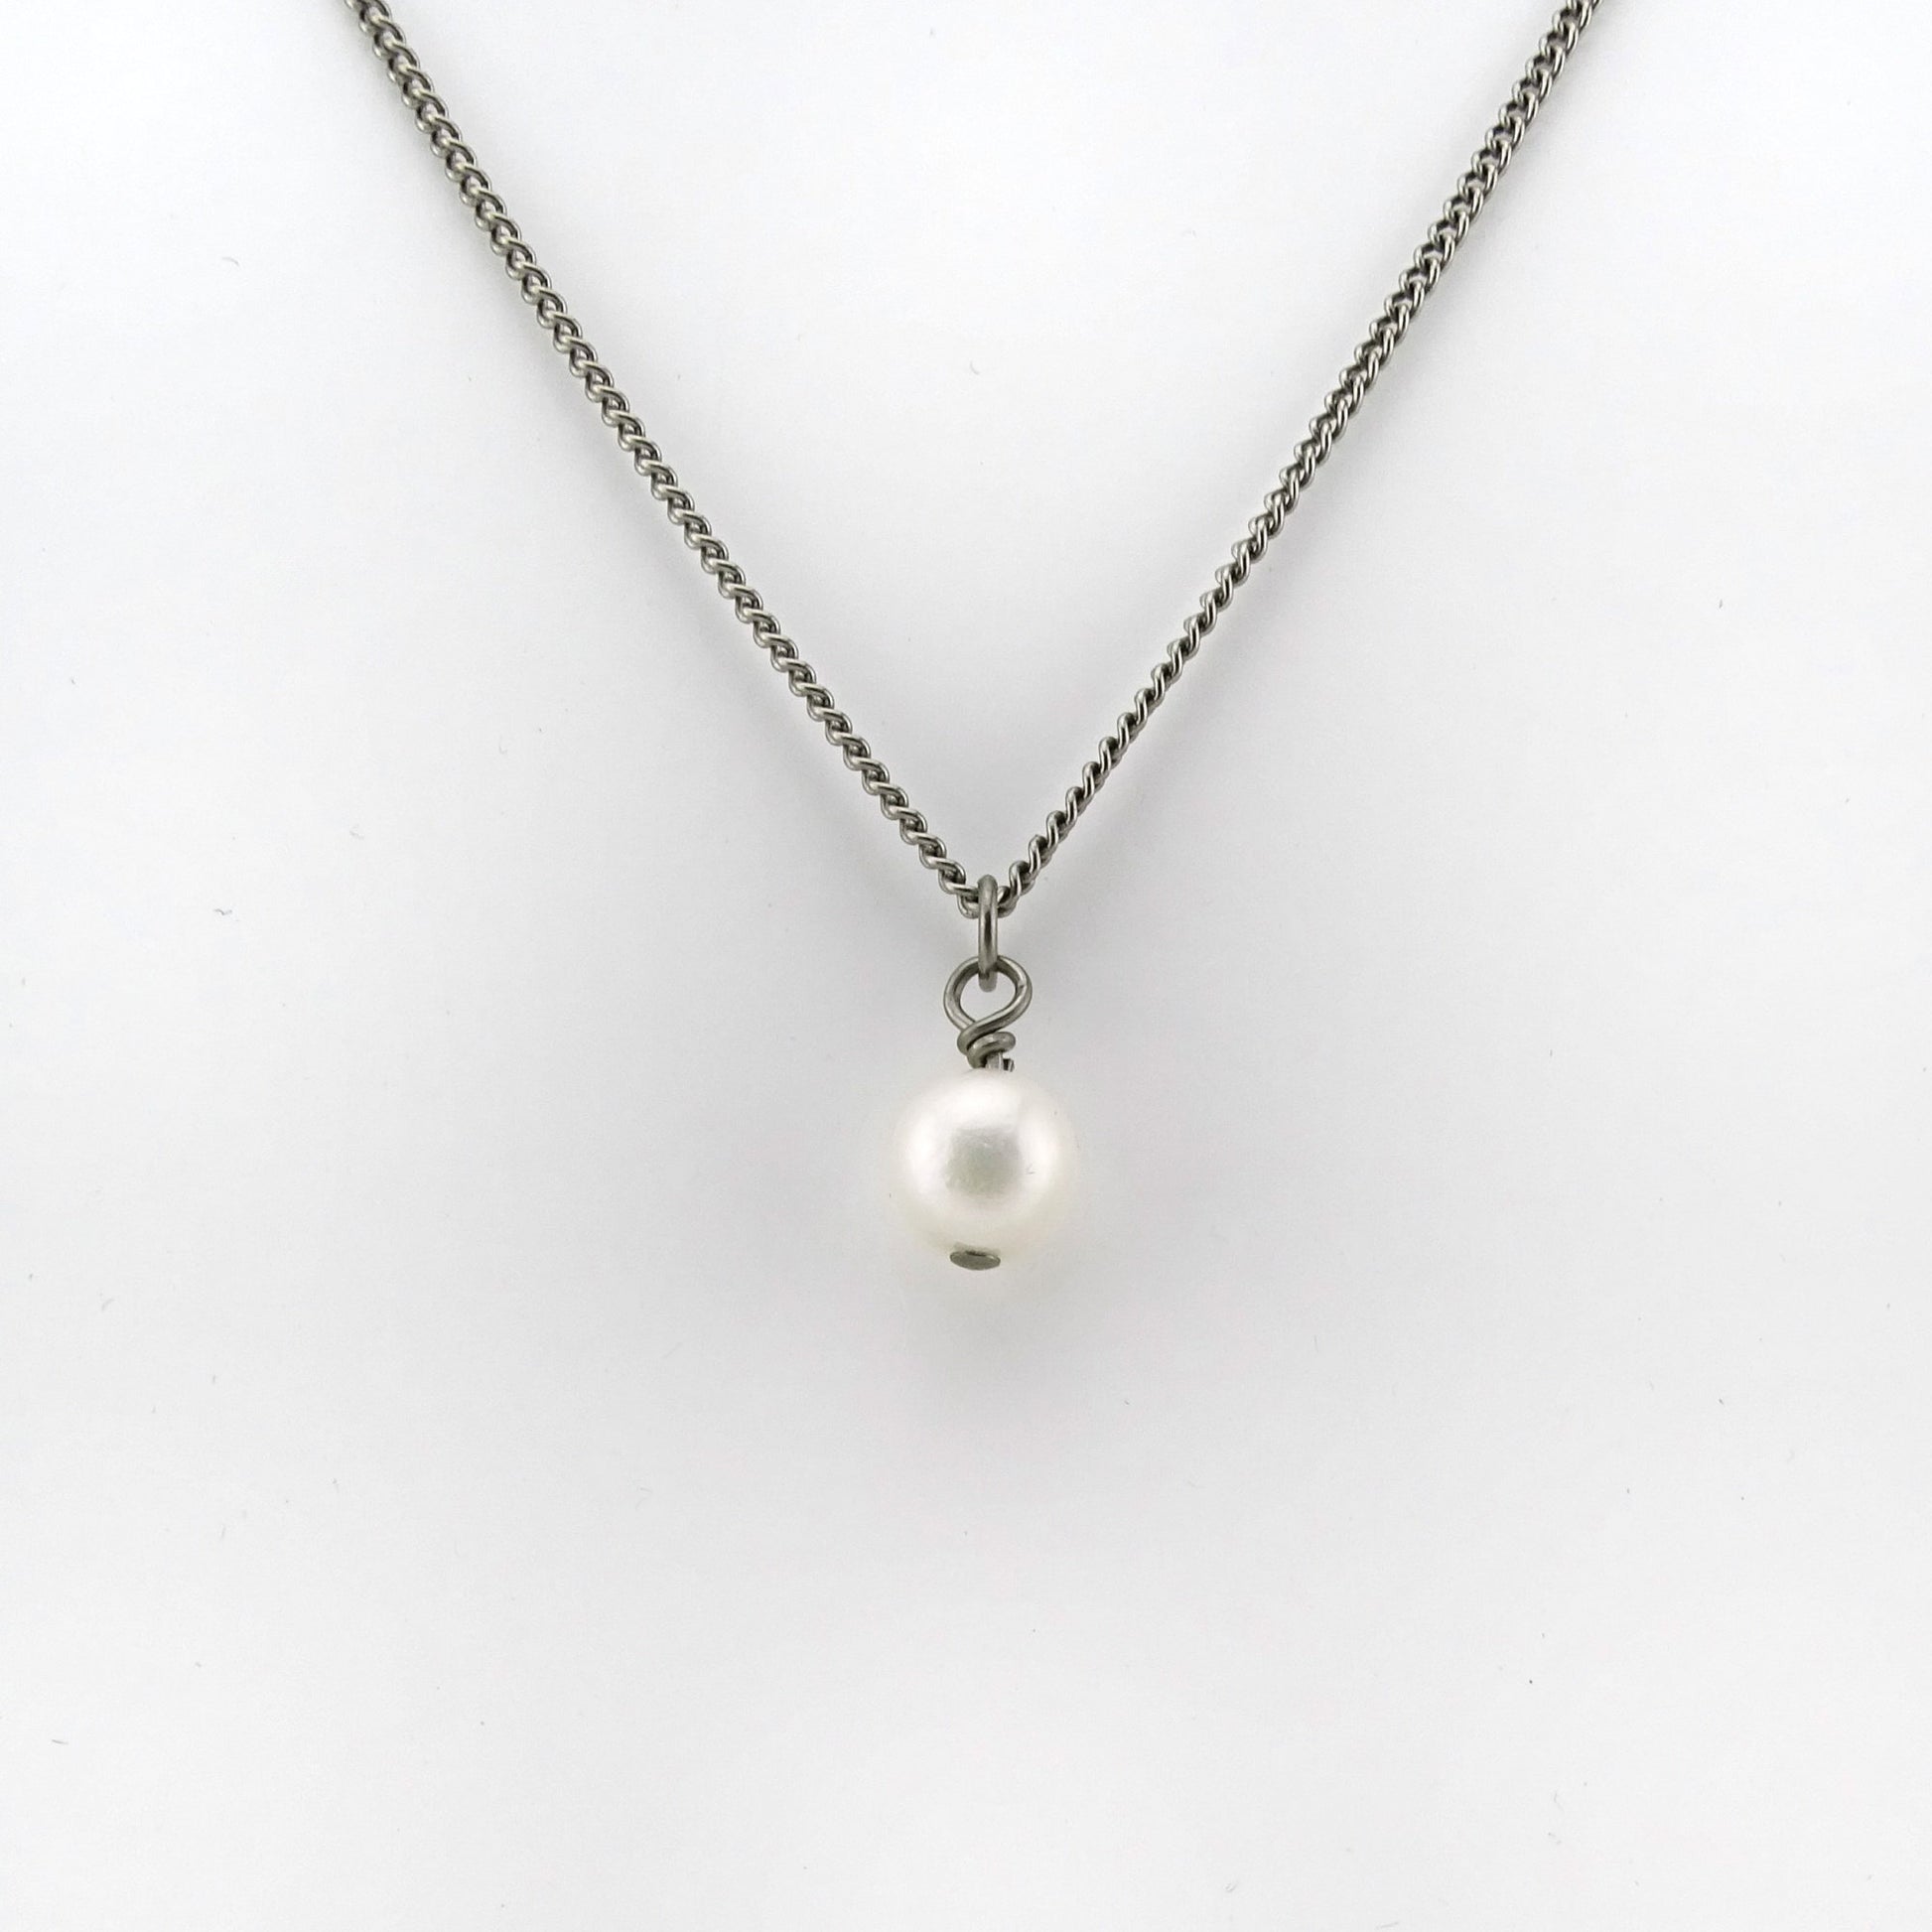 White Pearl Pendant Titanium Necklace, Real Pearl Necklace for Sensitive Skin, Freshwater Pearl Titanium Jewelry, Hypoallergenic Nickel Free